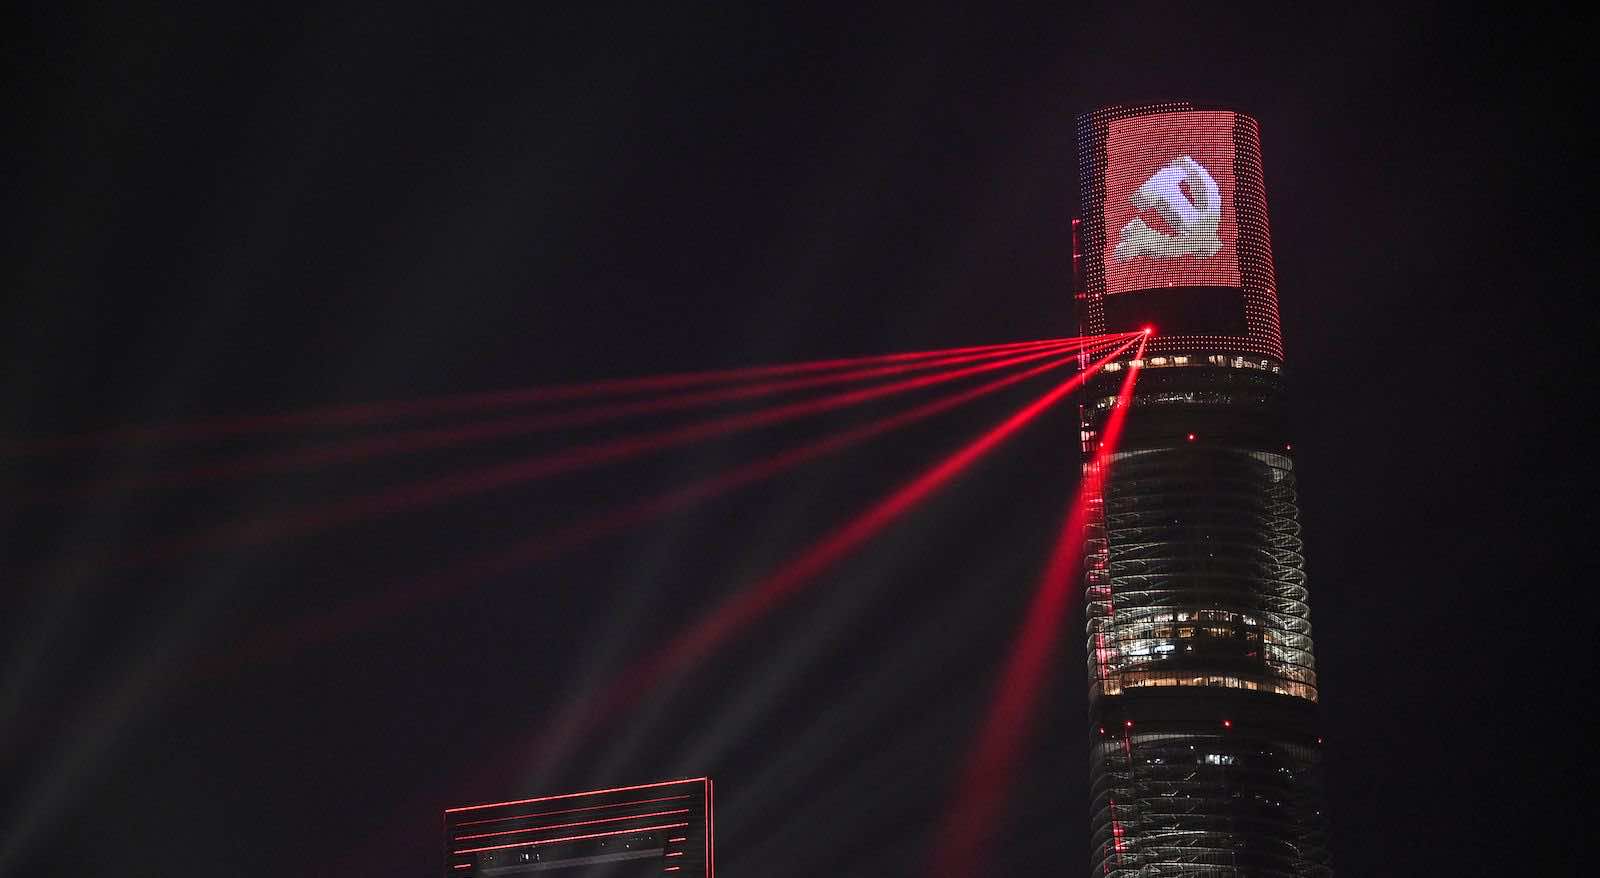 Shanghai Tower in Shanghai, displaying the hammer and sickle communist symbol, which also featured on the flag of the former USSR (Hector Retamal/AFP via Getty Images)